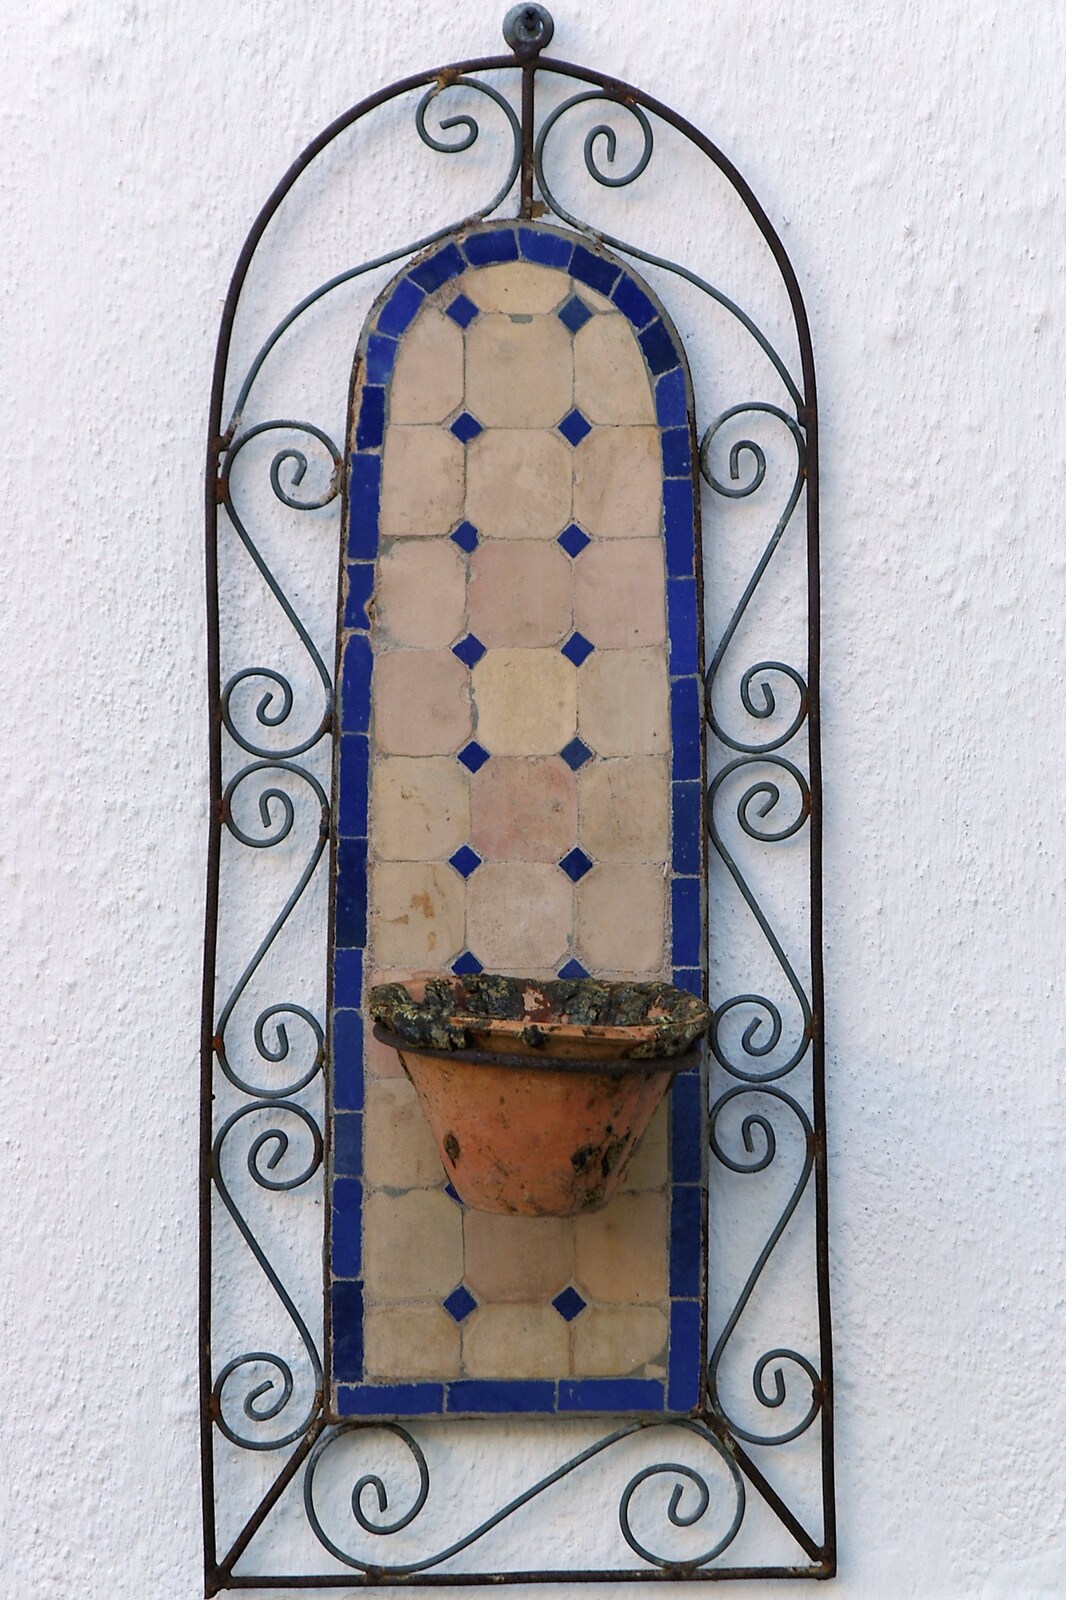 A plant-pot holder on the courtyard wall  from A Roussillon Farmhouse, Fourques, Perpignan, France - 17th September 2006